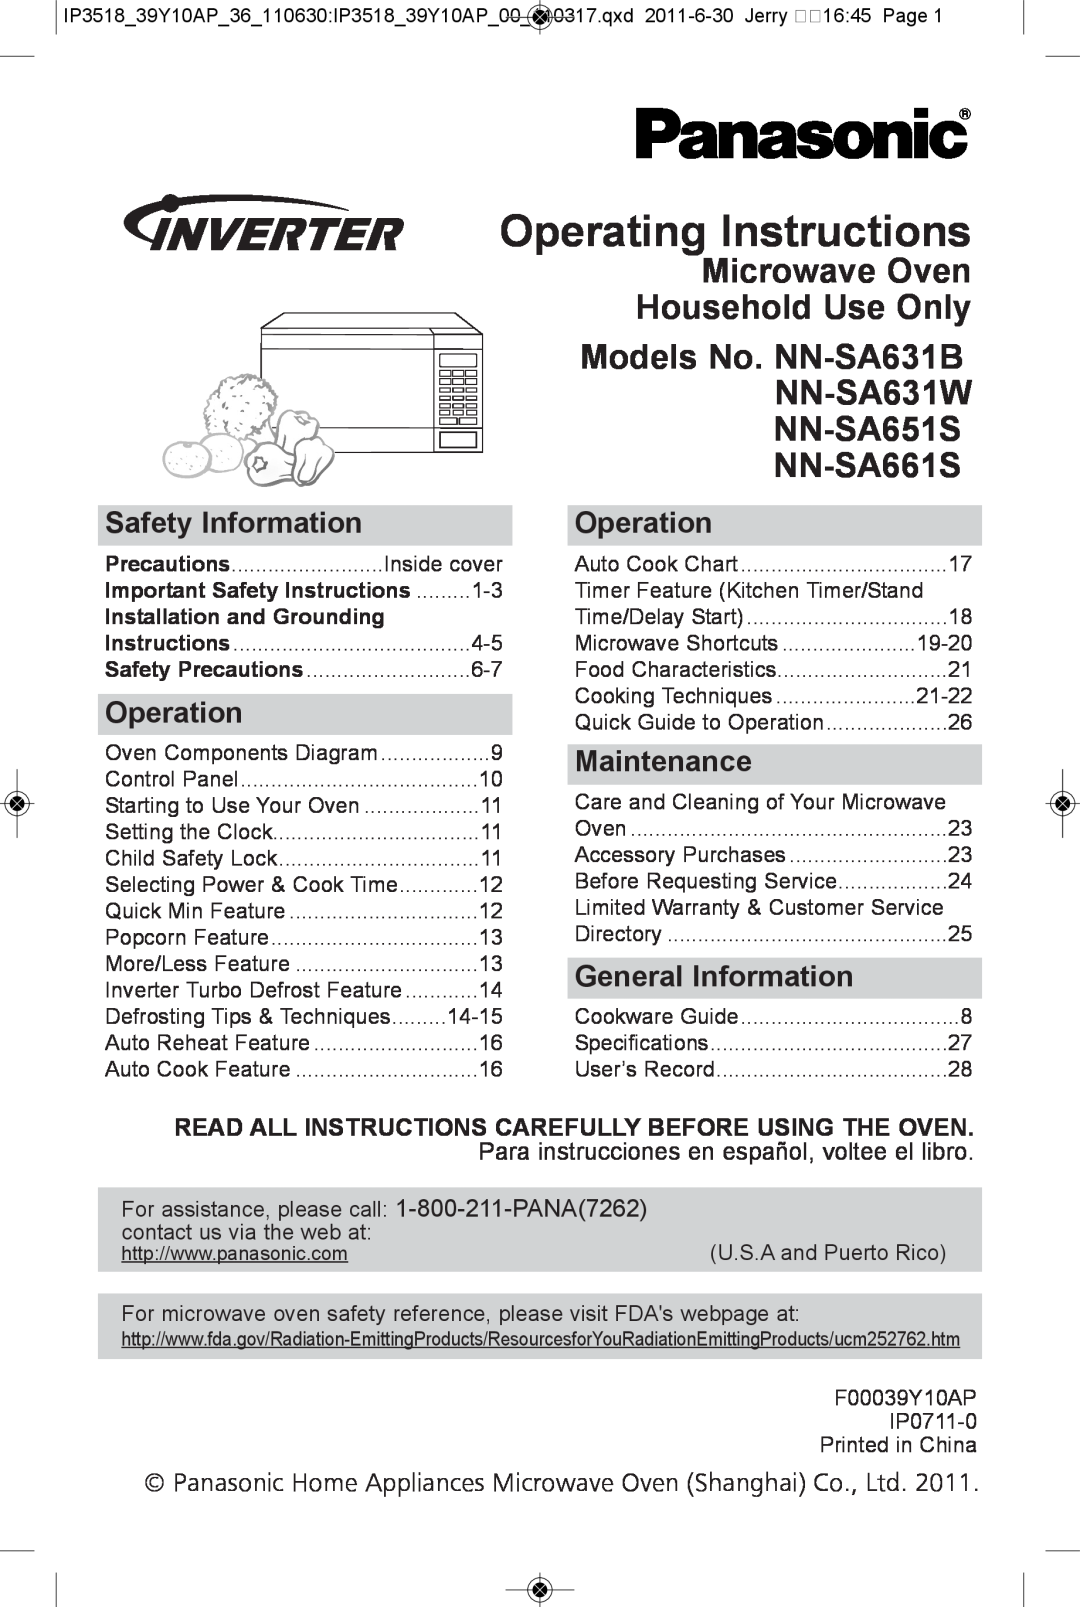 Panasonic NN-SA631B warranty operating instructions, Microwave oven household use only, safety information, operation 